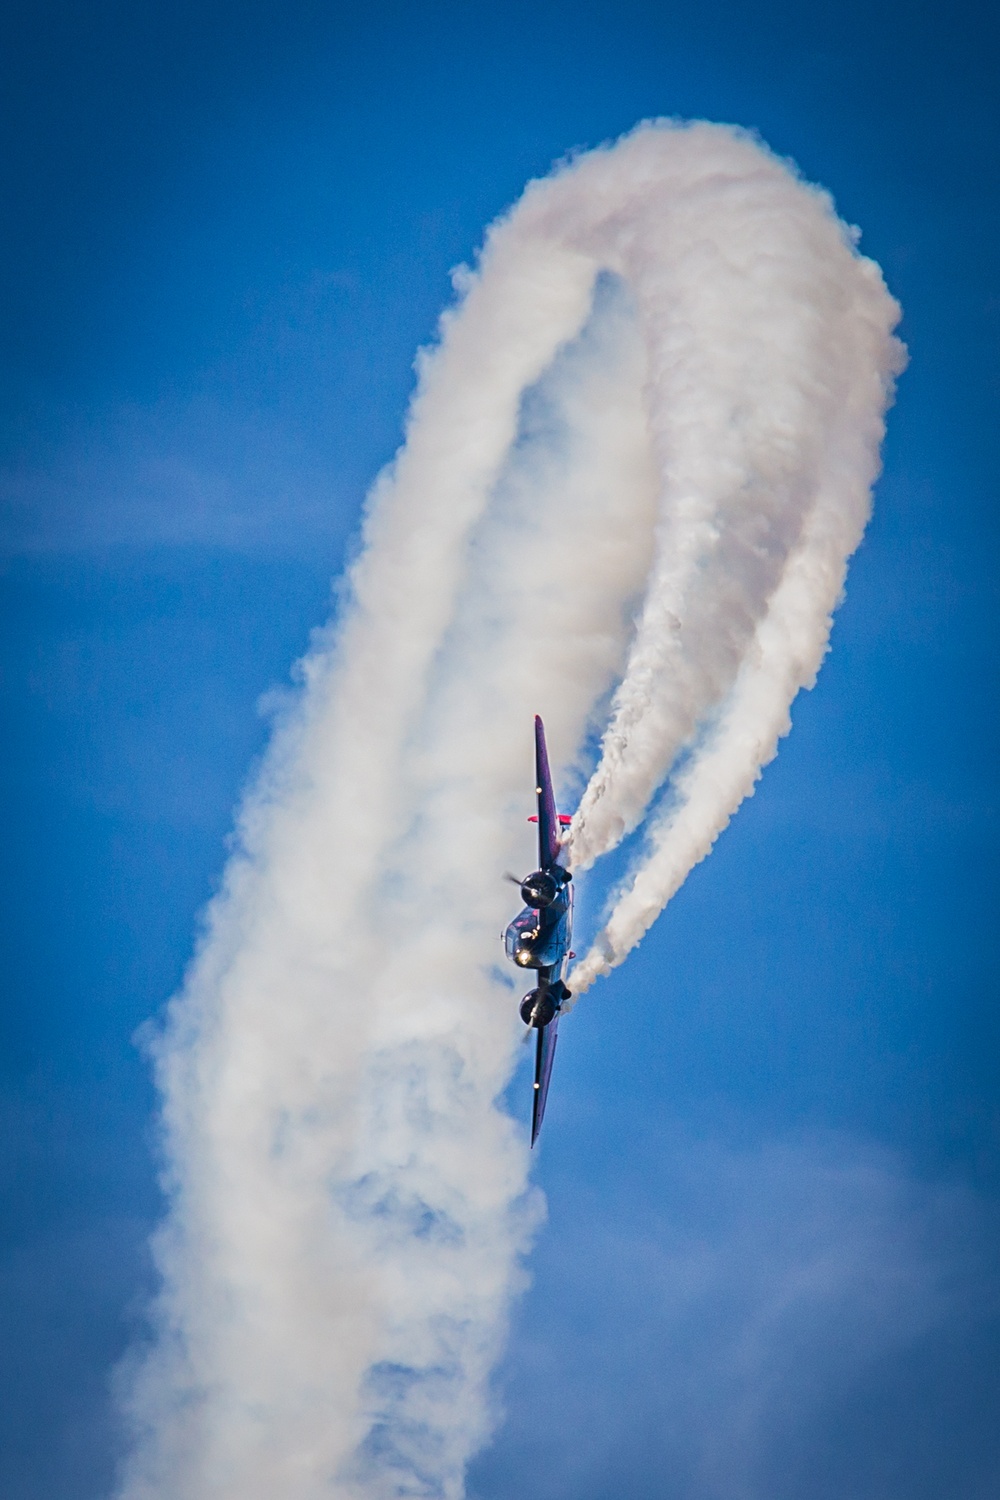 Sound of Speed Air Show performs for community above Missouri